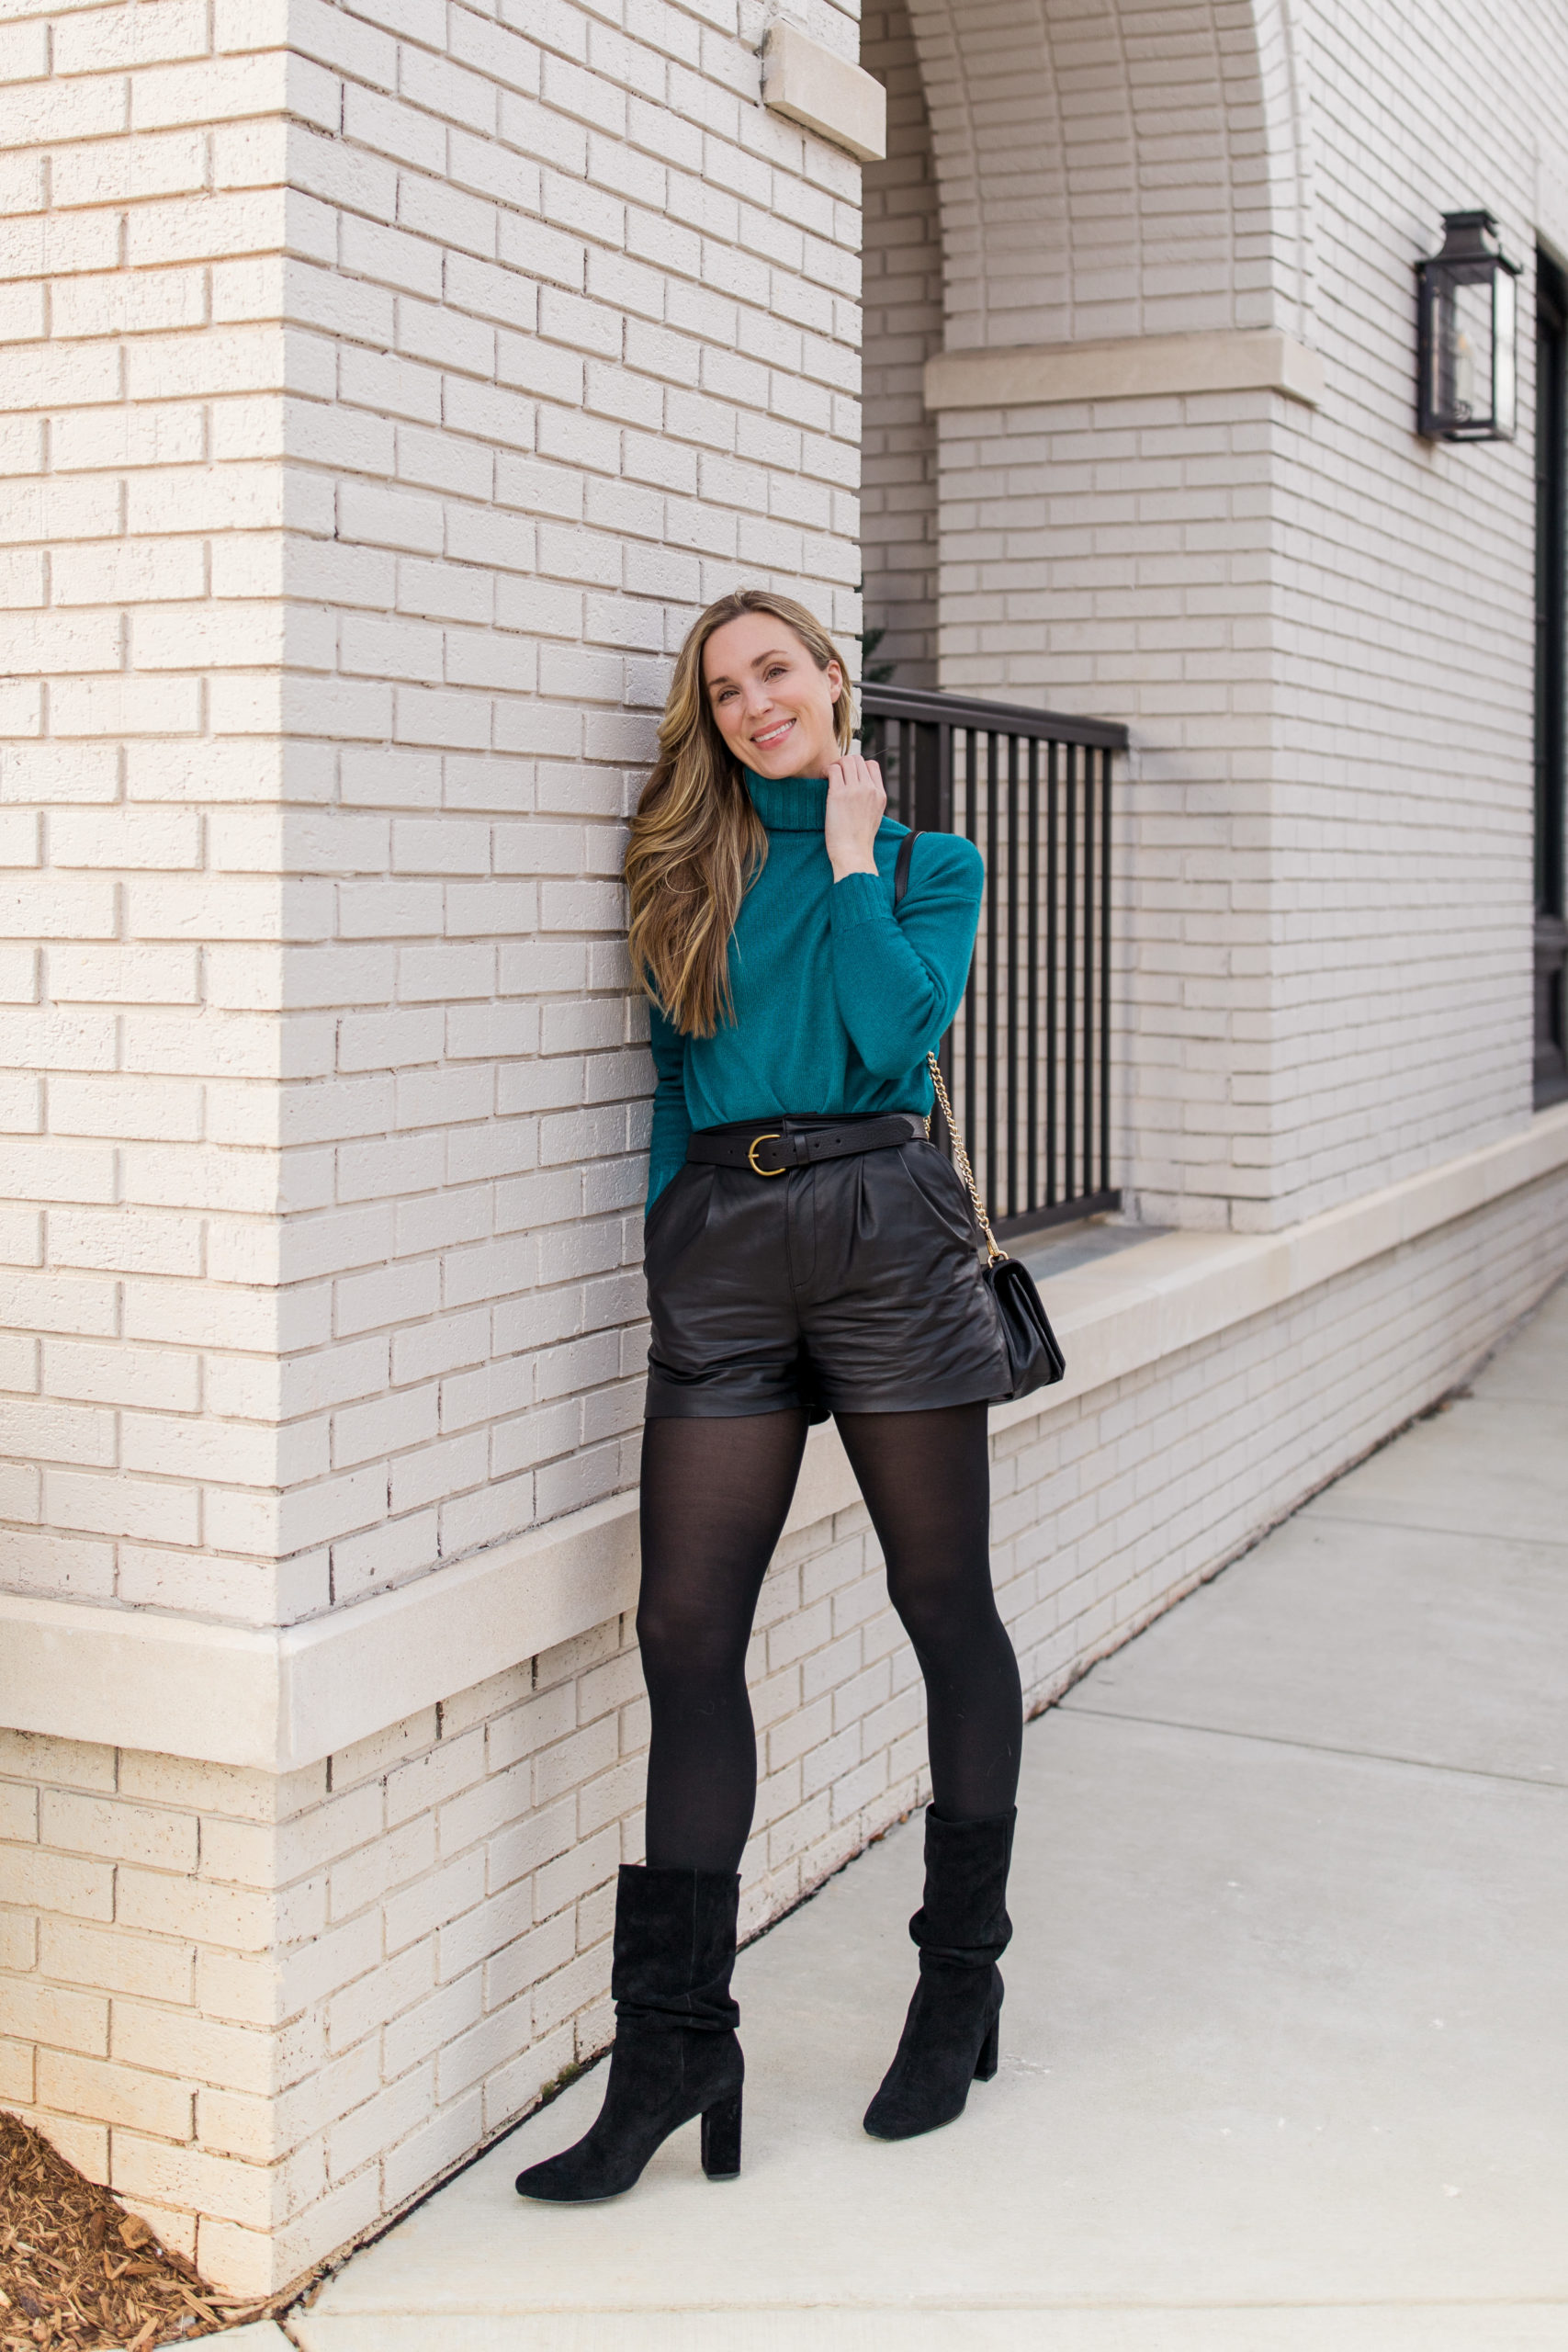 Winter Business Casual Outfit Ideas - an indigo day